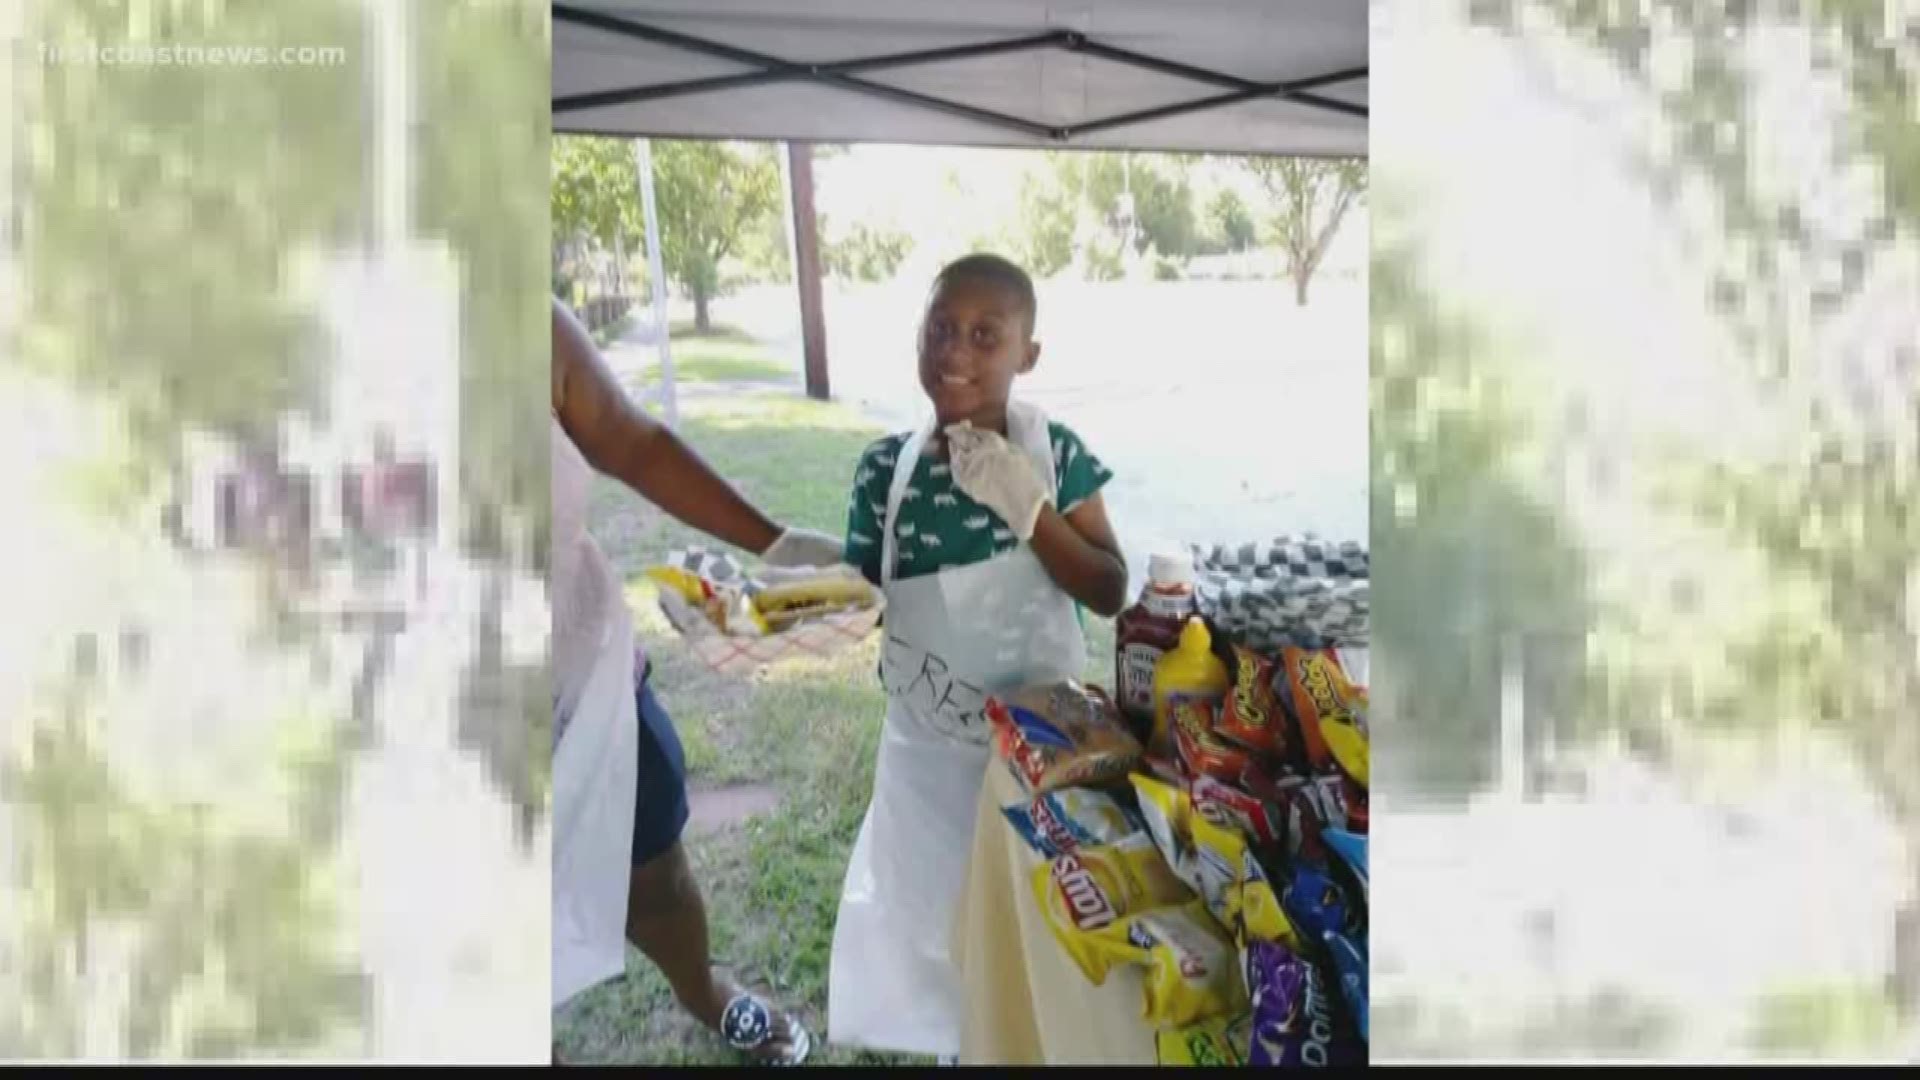 Jermaine Bell spent a whole year saving up his money to spend his seventh birthday at Disney World, but just weeks before buying those tickets, he figured Hurricane Dorian evacuees needed the money more than he did.